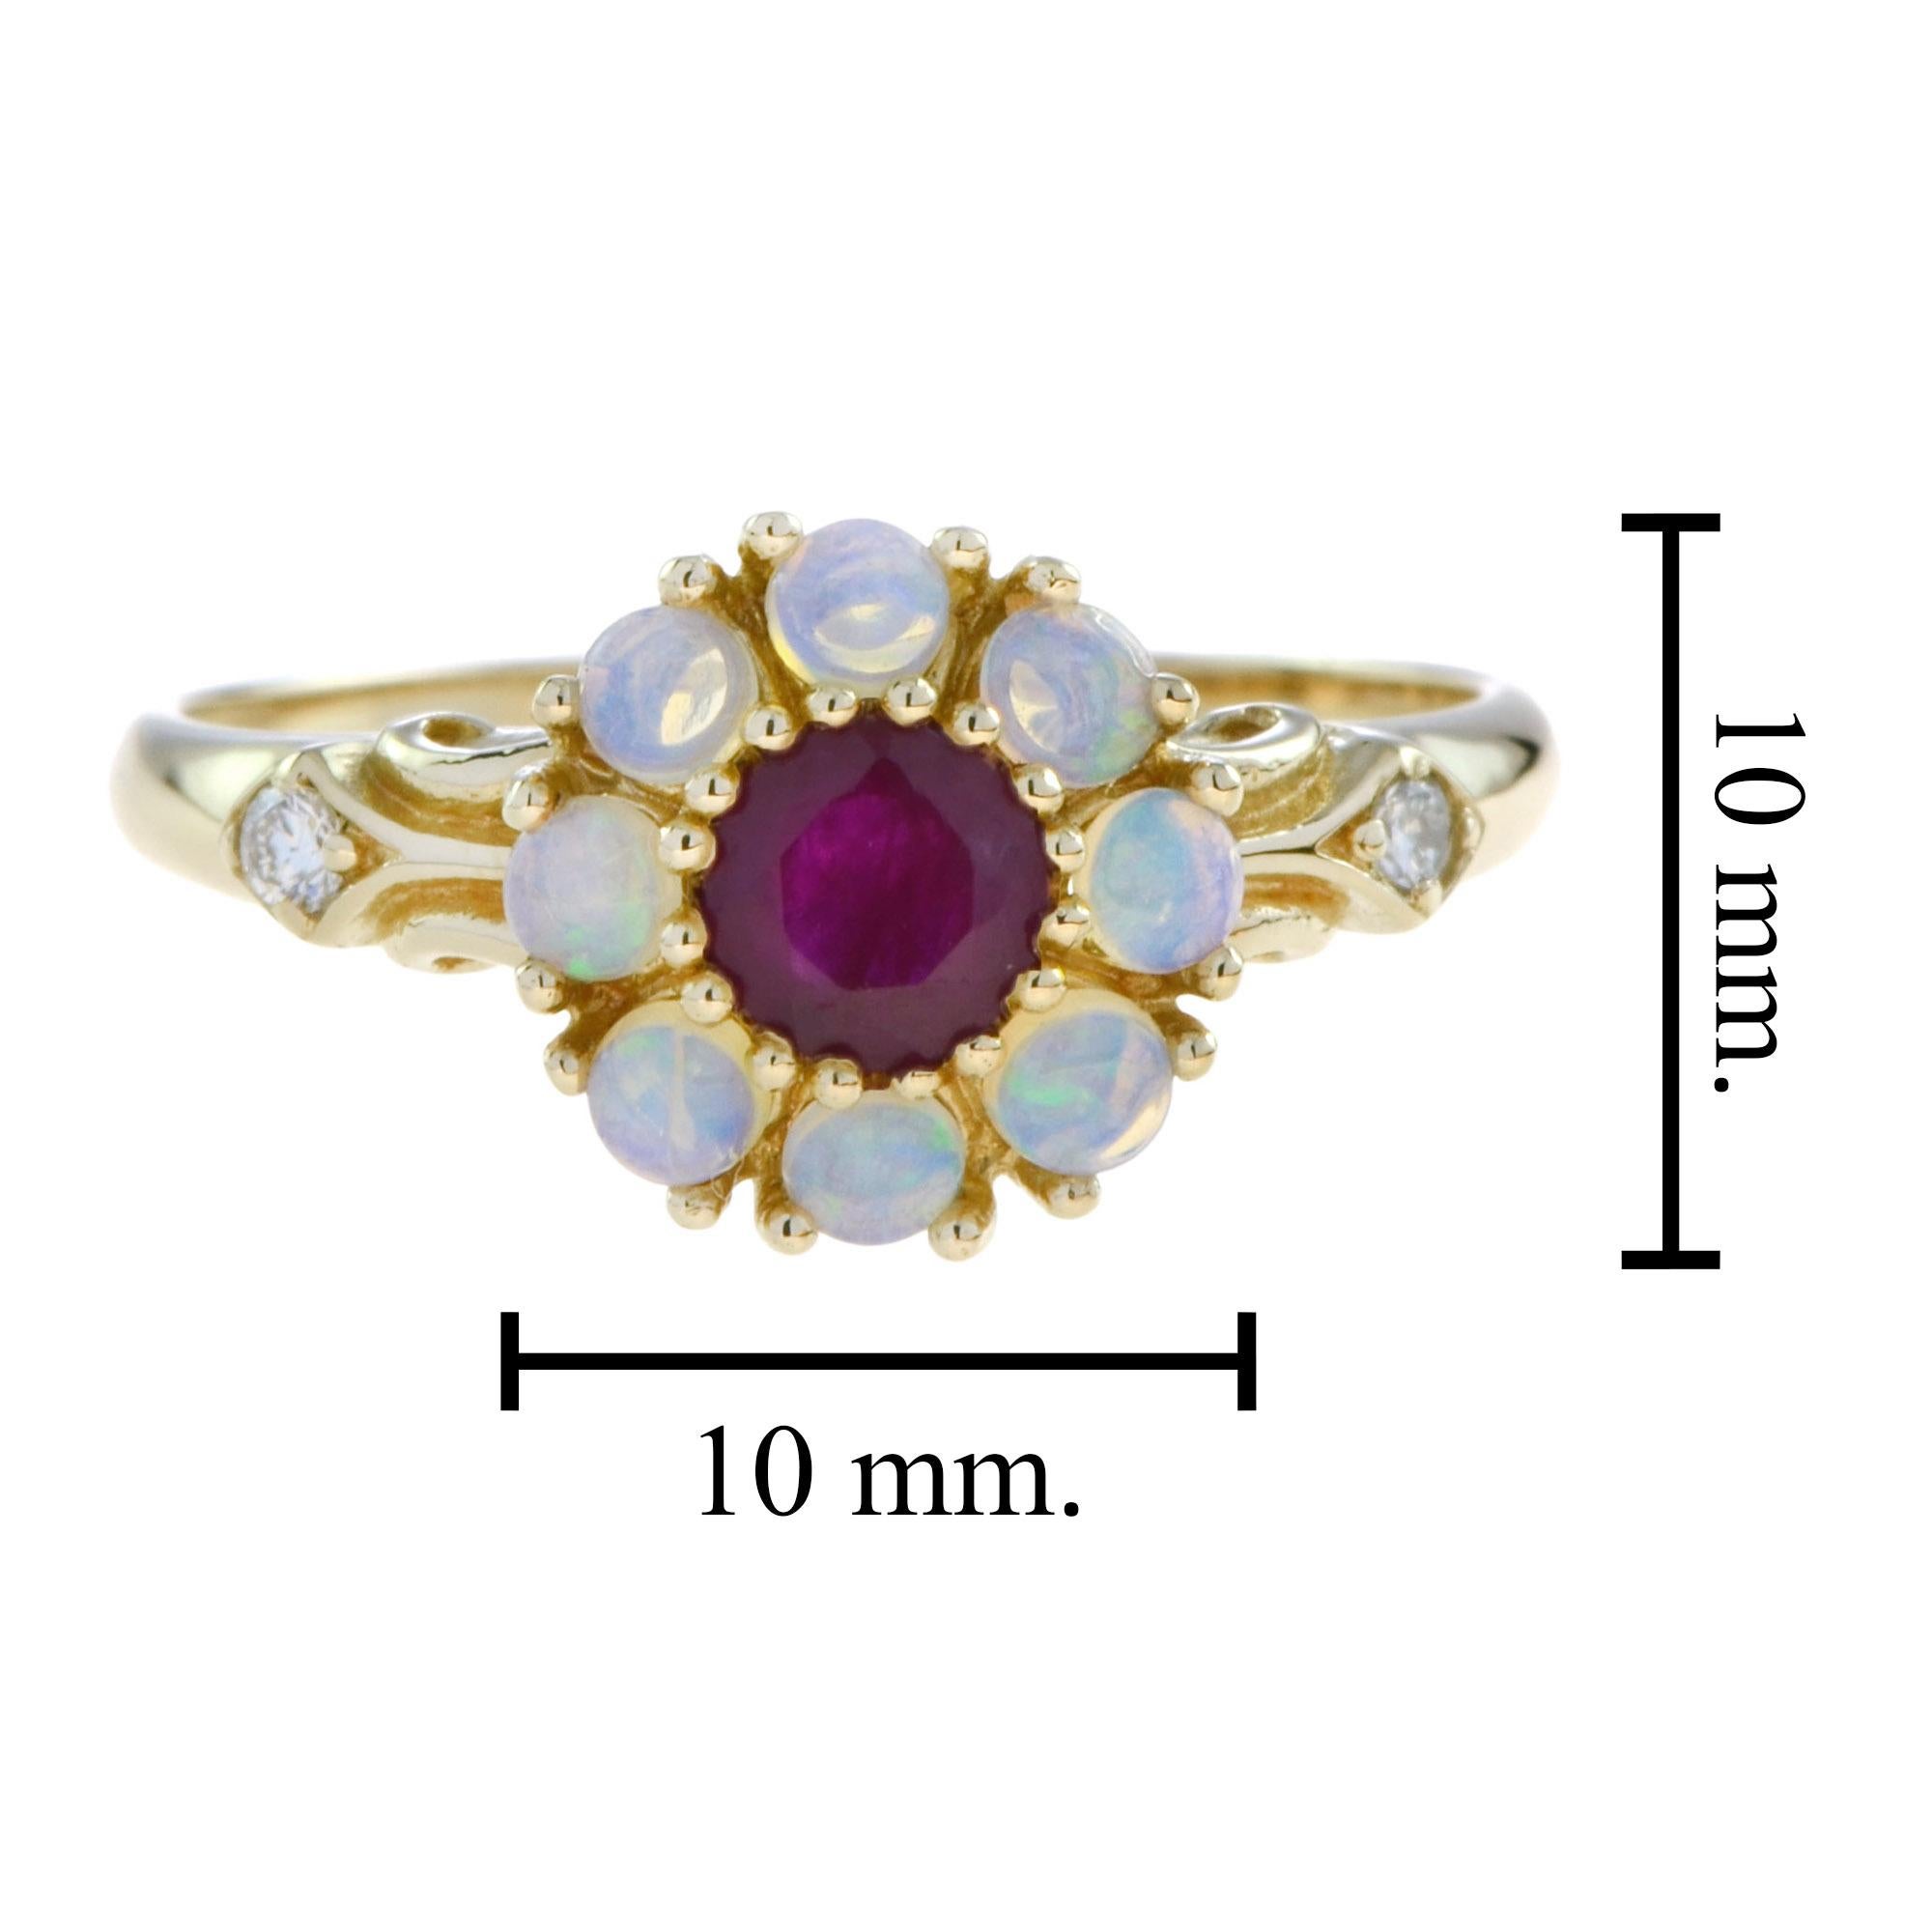 For Sale:  Vintage Style Ruby and Opal Floral Cluster Ring in 14K Yellow Gold 6